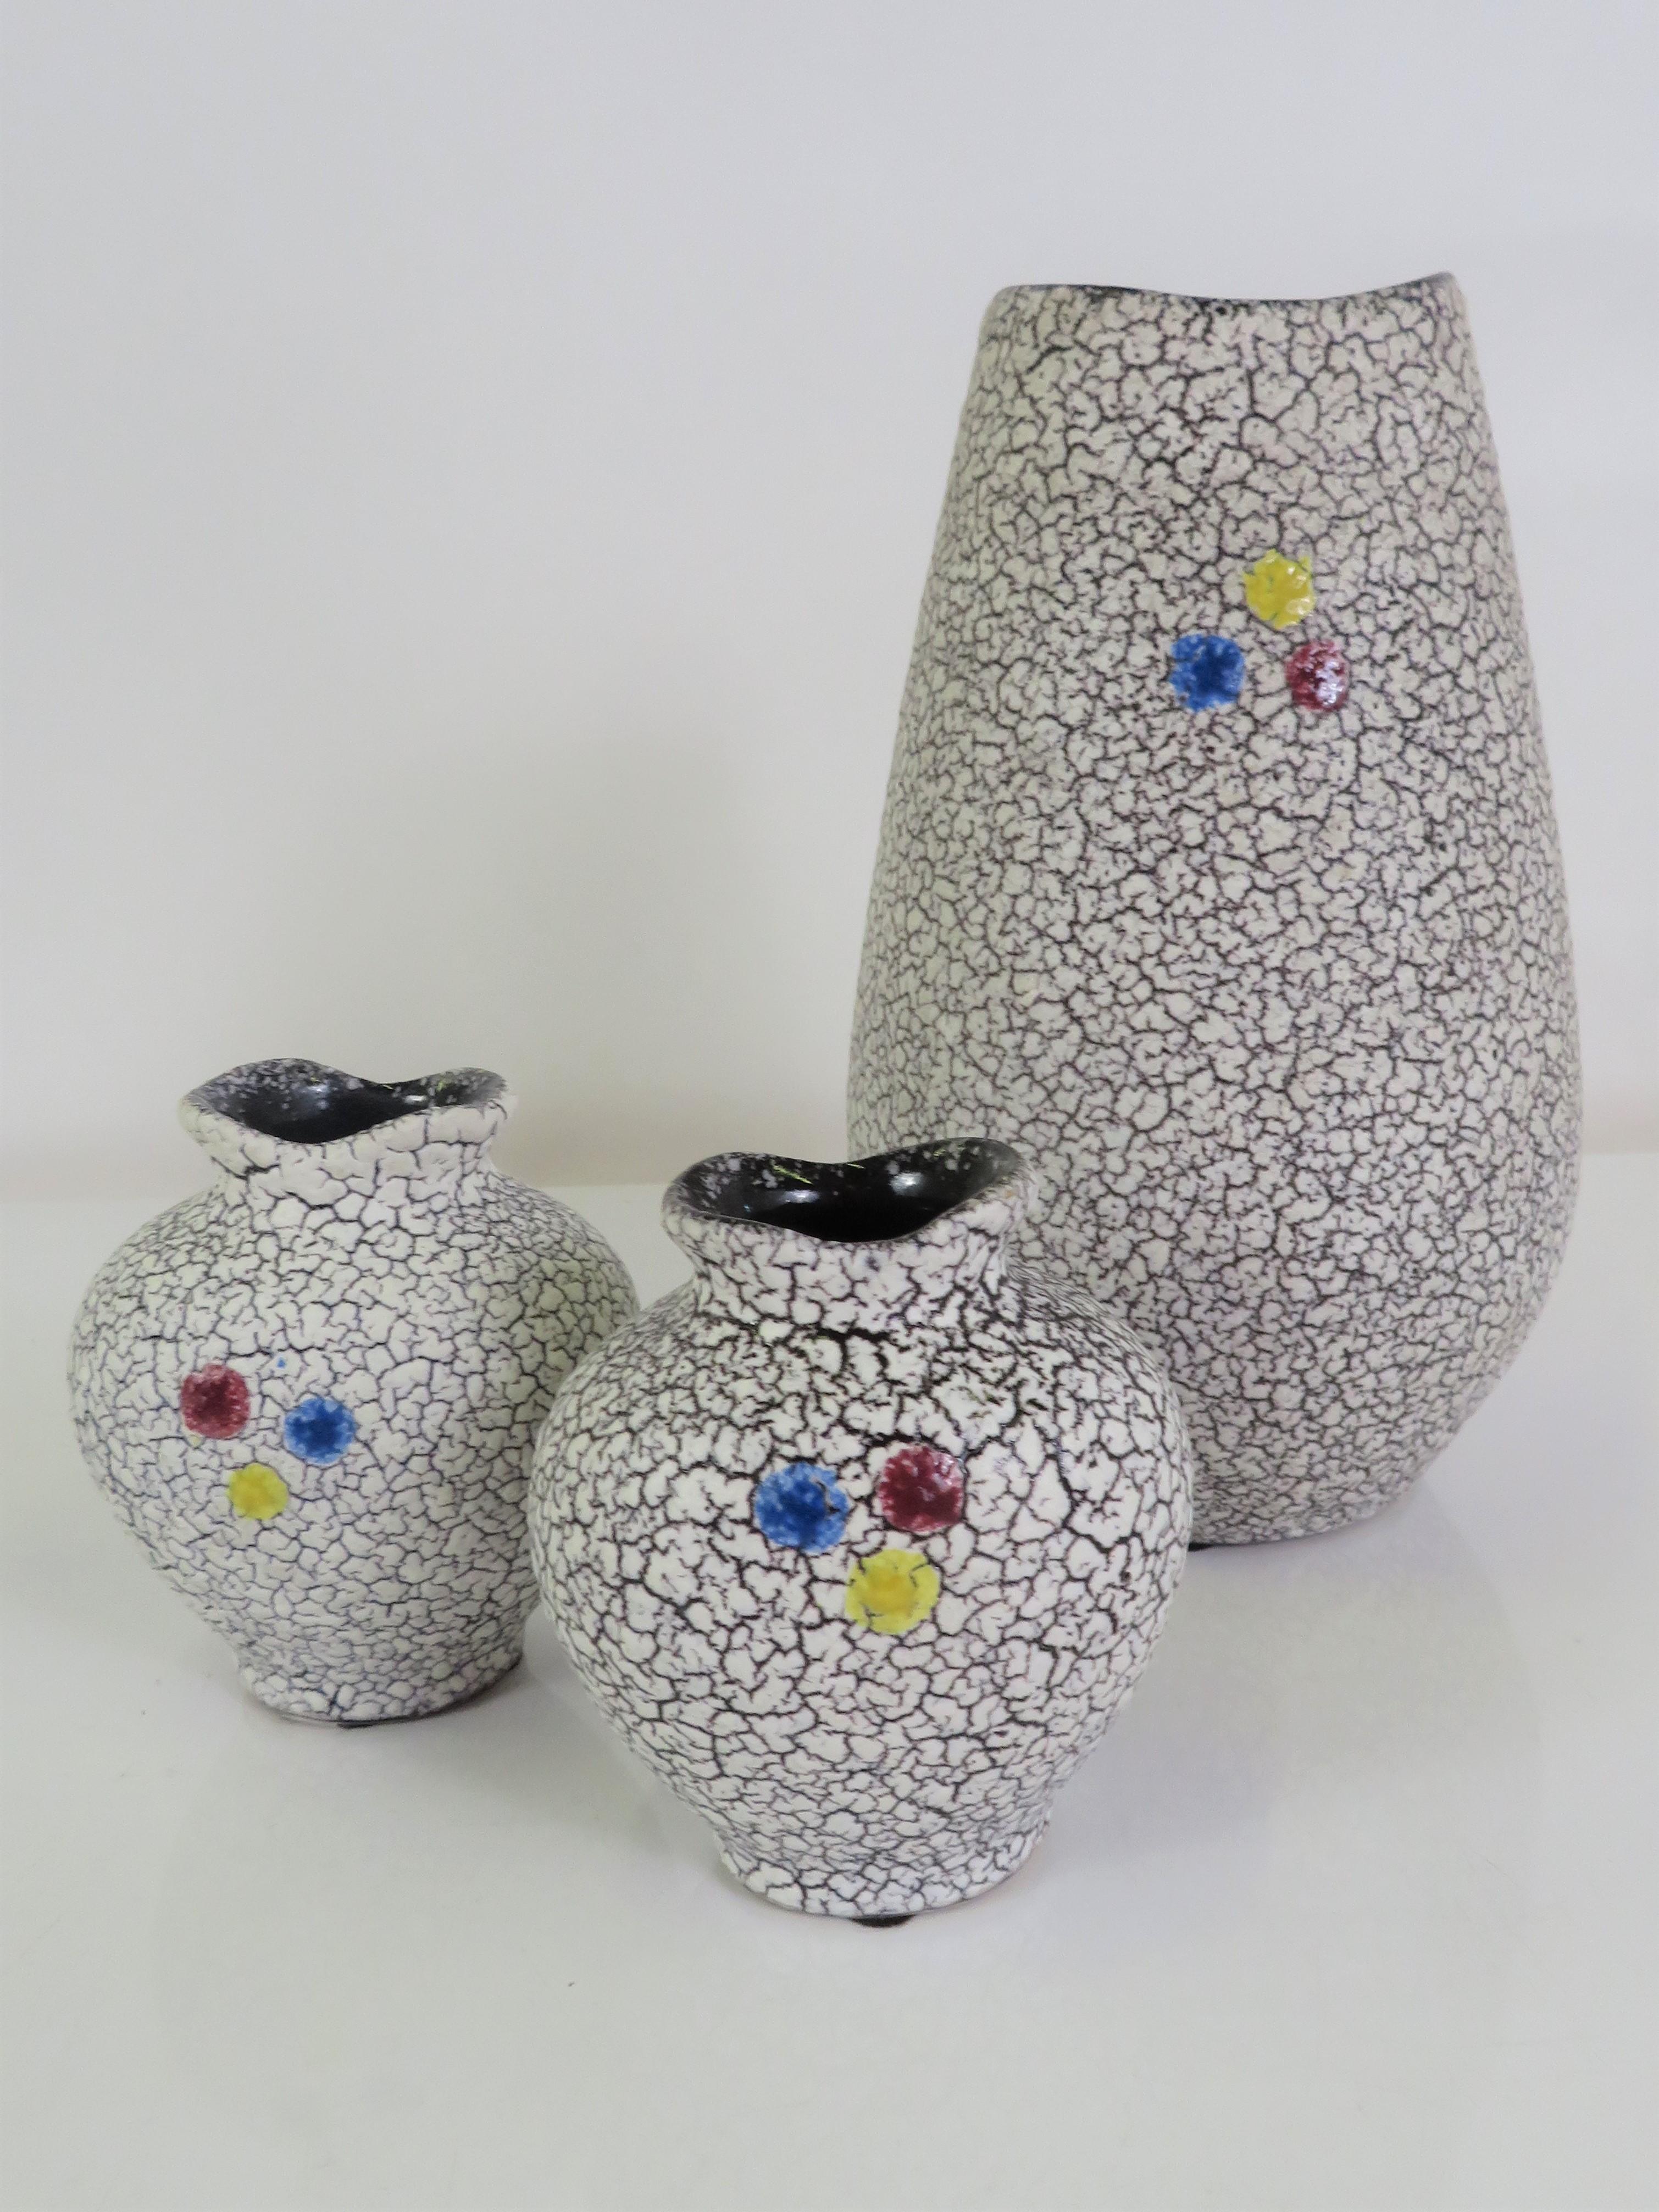 Great Modern 1958 set of 3 Mid Century Jopeko Keramik crinckled Lava glaze ceramic pieces, consisting of one large vase and a pair of smaller complimentary vases. All covered in a white crinkled lava glaze on a dark brown background with a